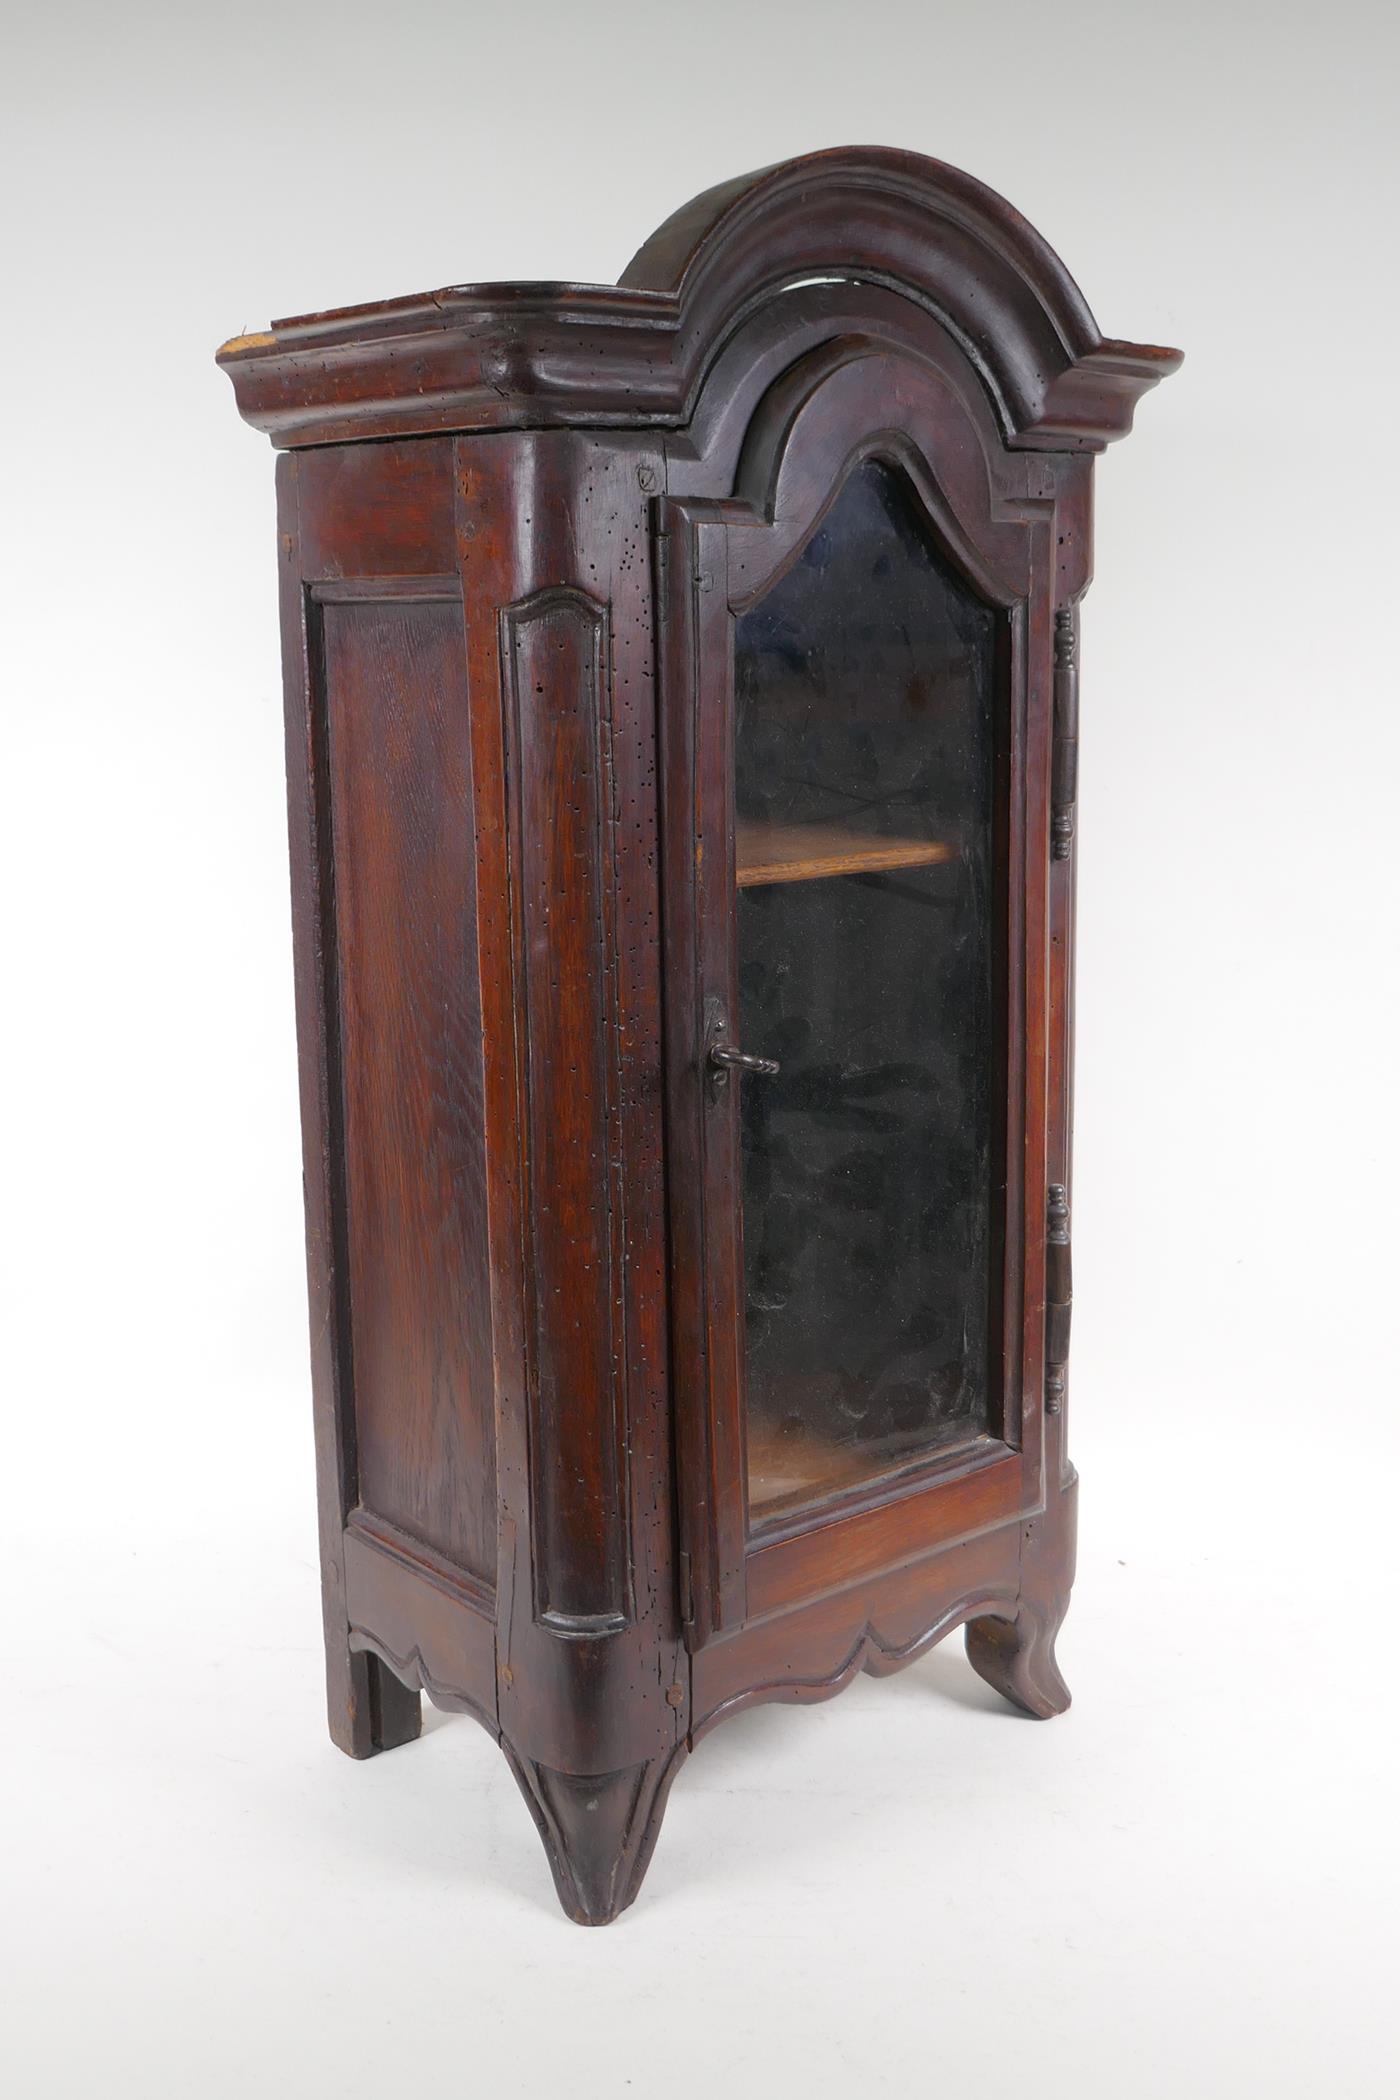 A C19th French glazed cabinet in the form of a miniature armoire, 36 x 21 x 68cm - Image 2 of 2